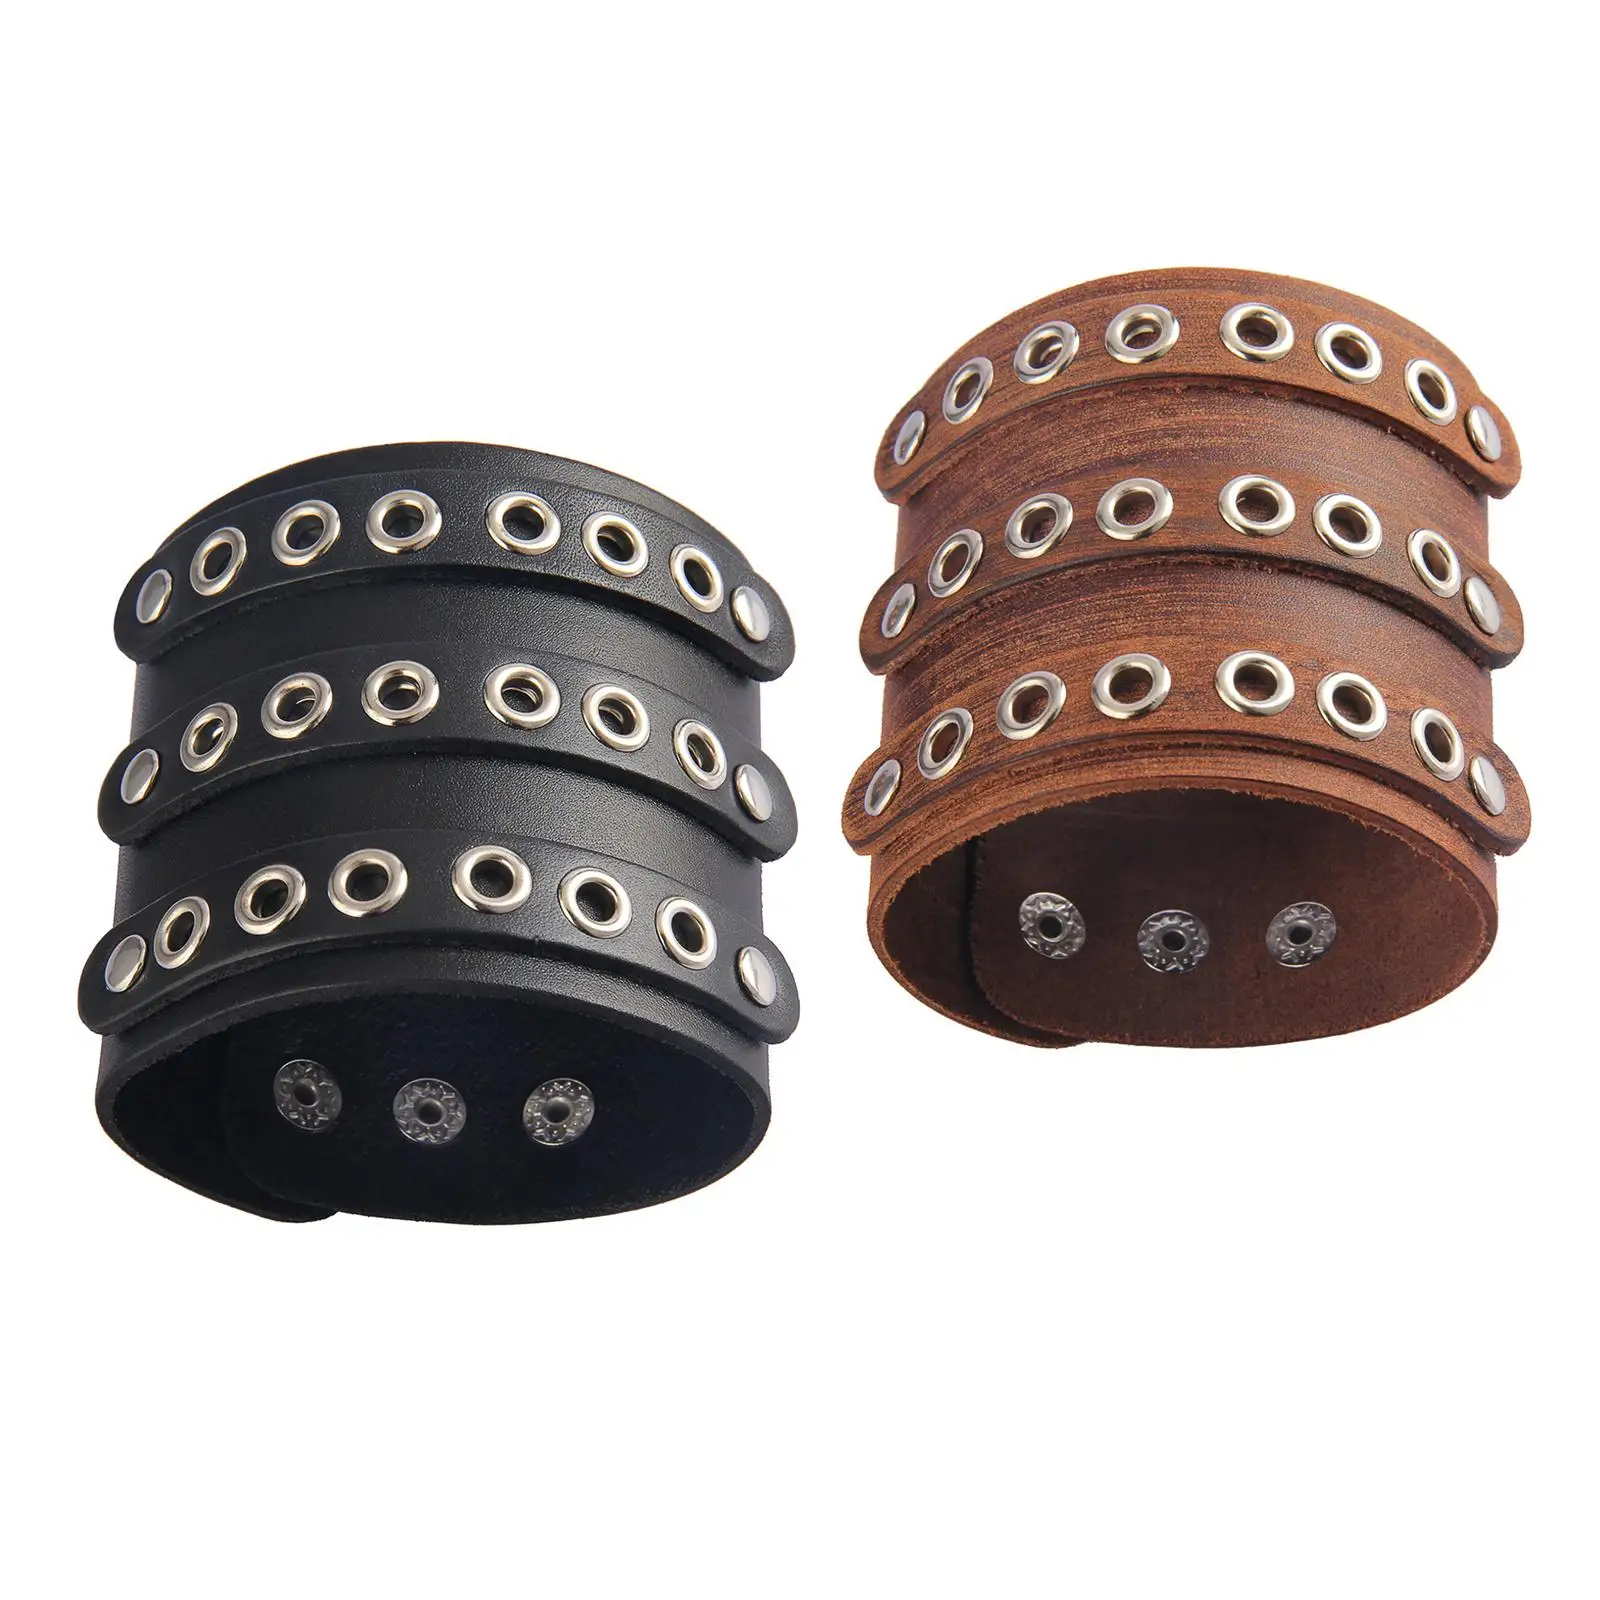 PU Leather Bracelet Vintage Fashion Three Rows of Holes Hip Hop Cuff Wrap Bracelet for Birthday Party Husband Men Women Brother